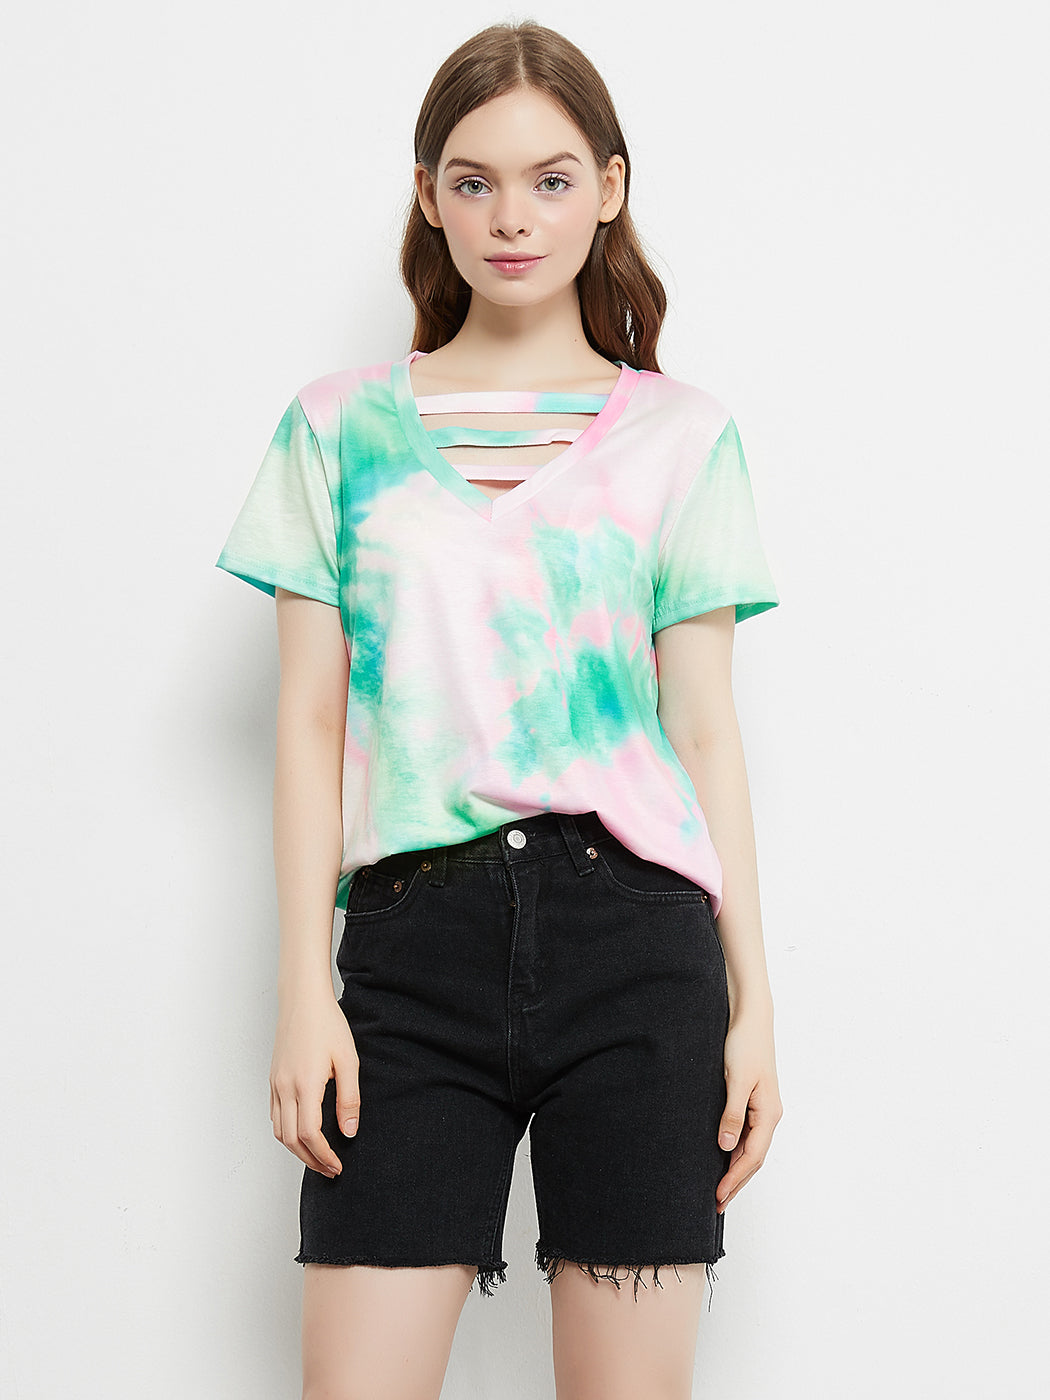 Tie Dye Printed Stripe V-Neck Stretch Short Sleeve Casual Loose Tops T-shirts